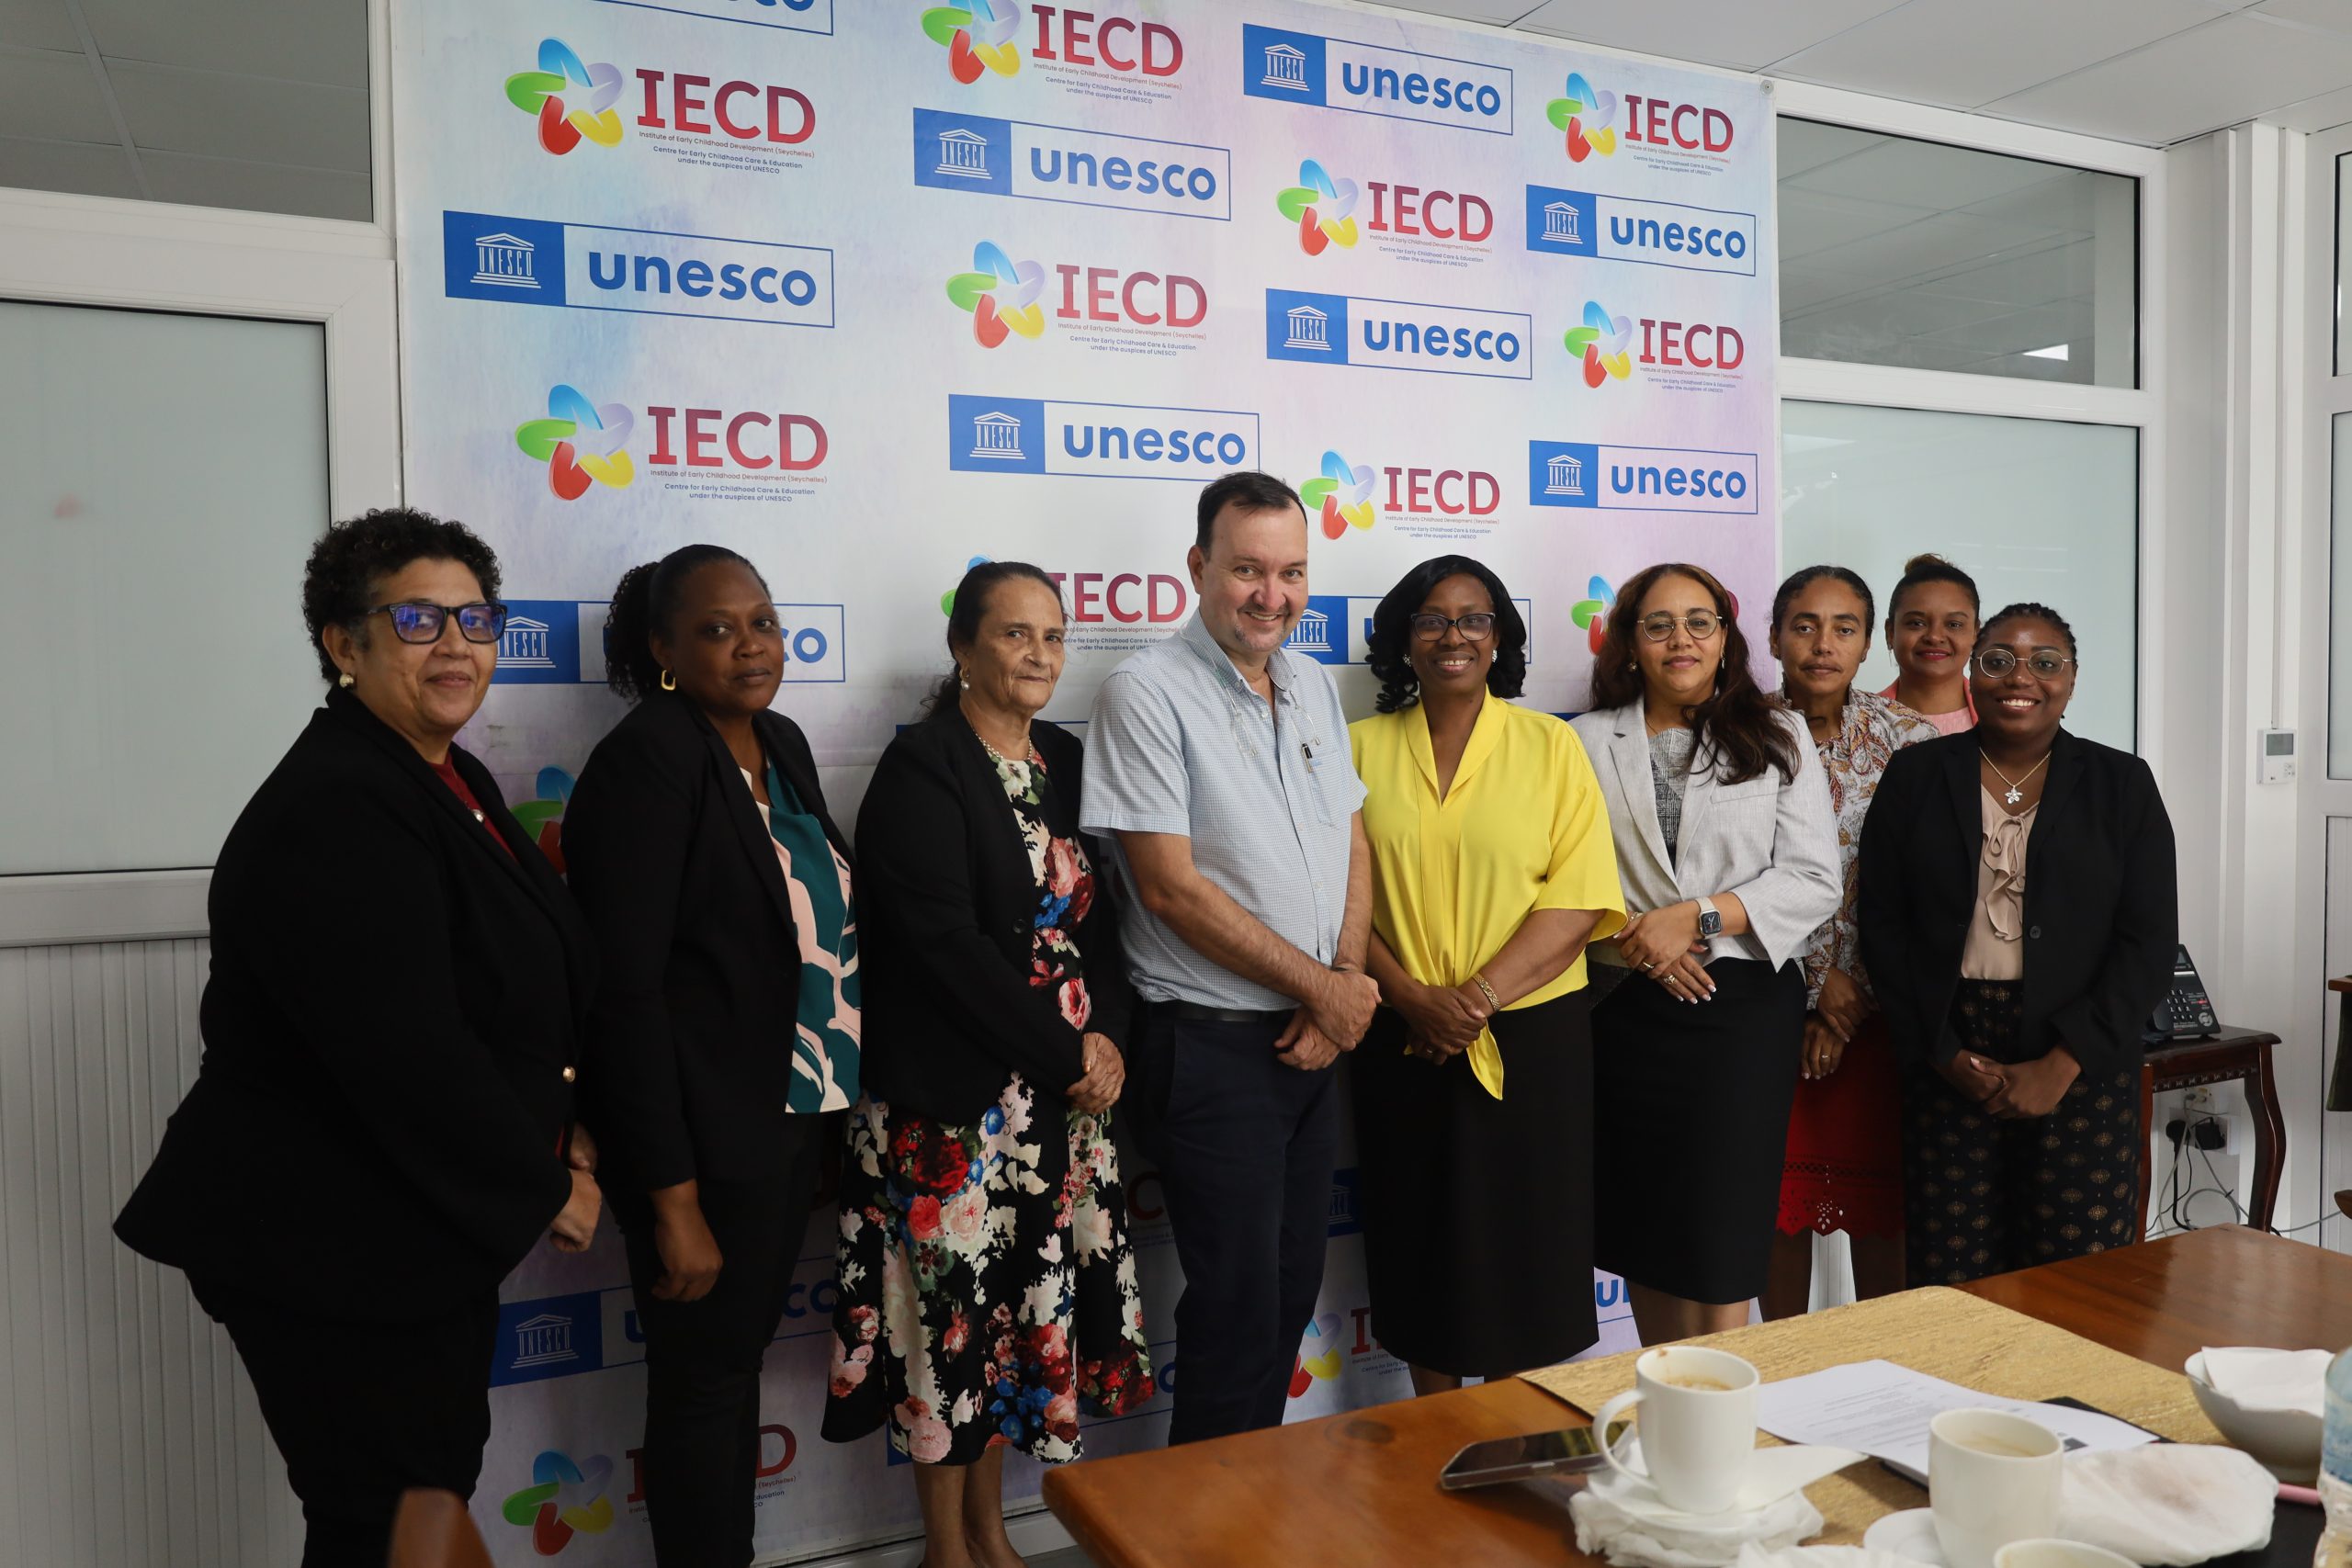 UNESCO REGIONAL OFFICE FOR EASTERN AFRICA EXPLORES THE IECD/UNESCO CATEGORY 2 INSTITUTE’S INITIATIVES TO PROMOTE EARLY CHILDHOOD CARE AND EDUCATION IN SEYCHELLES.